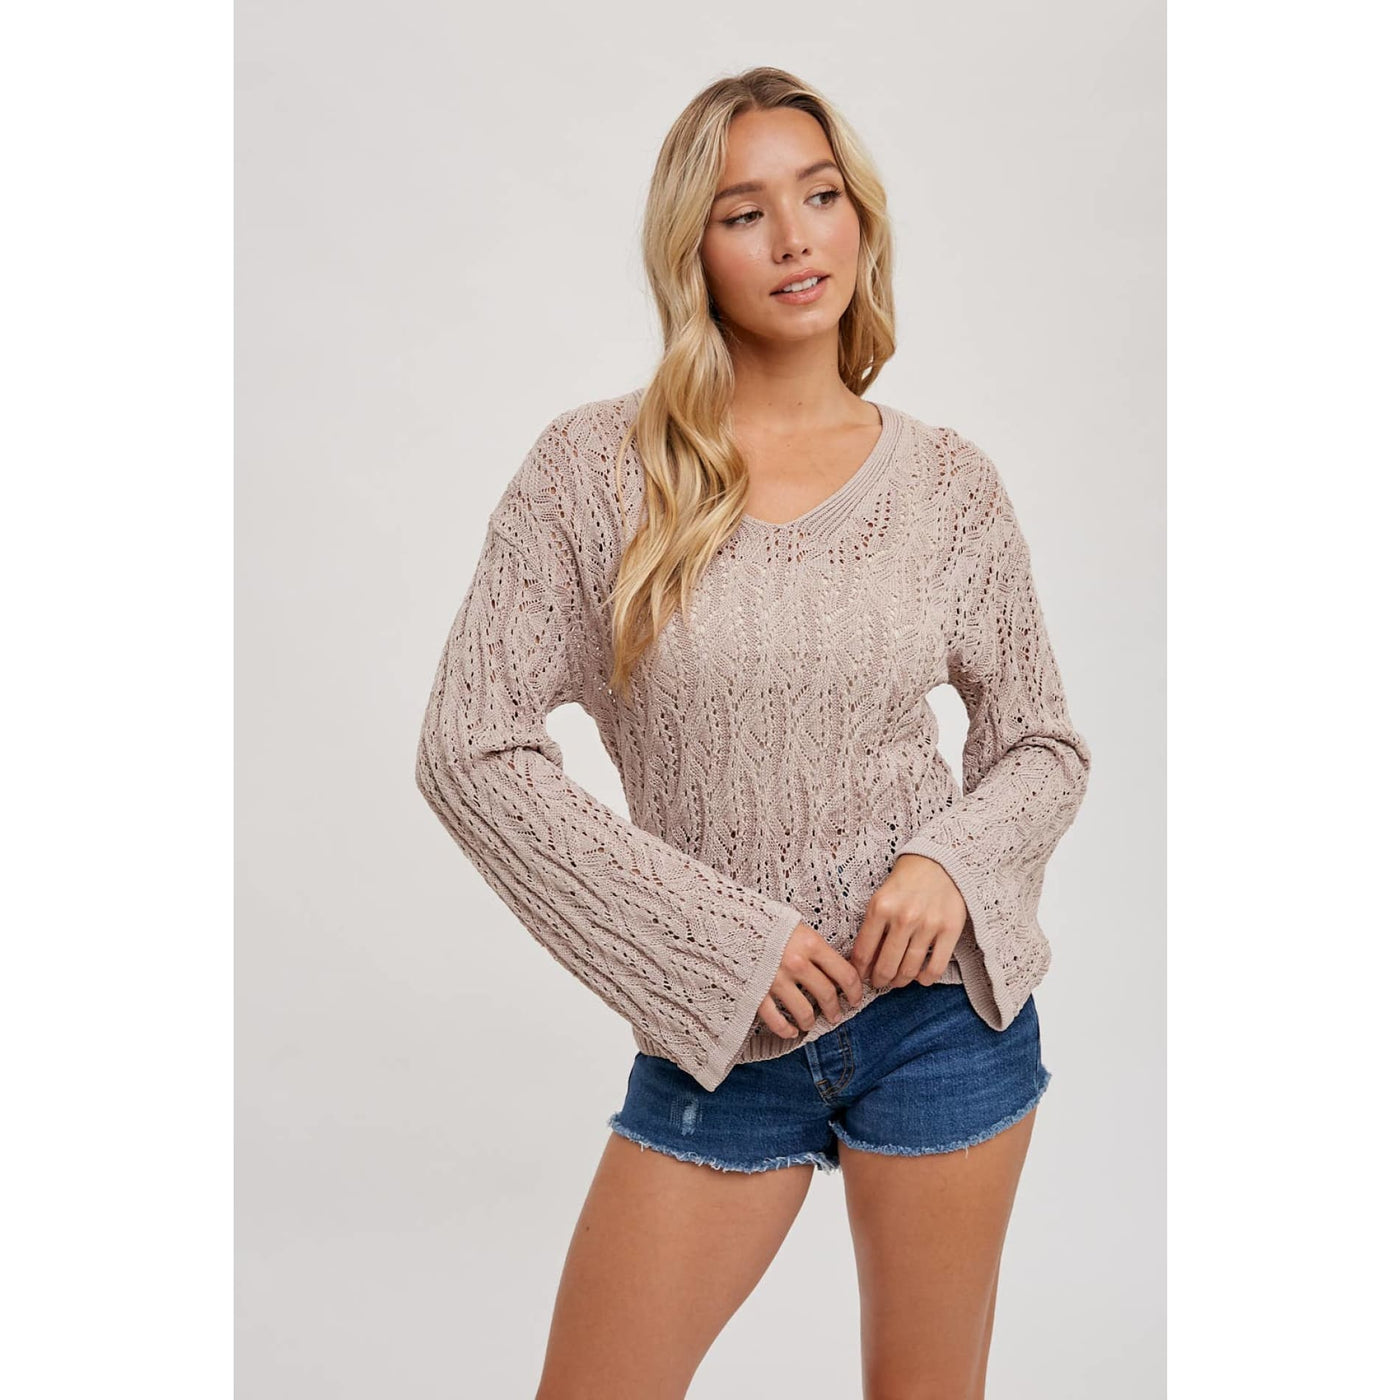 Going For It Sweater - 130 Sweaters/Cardigans